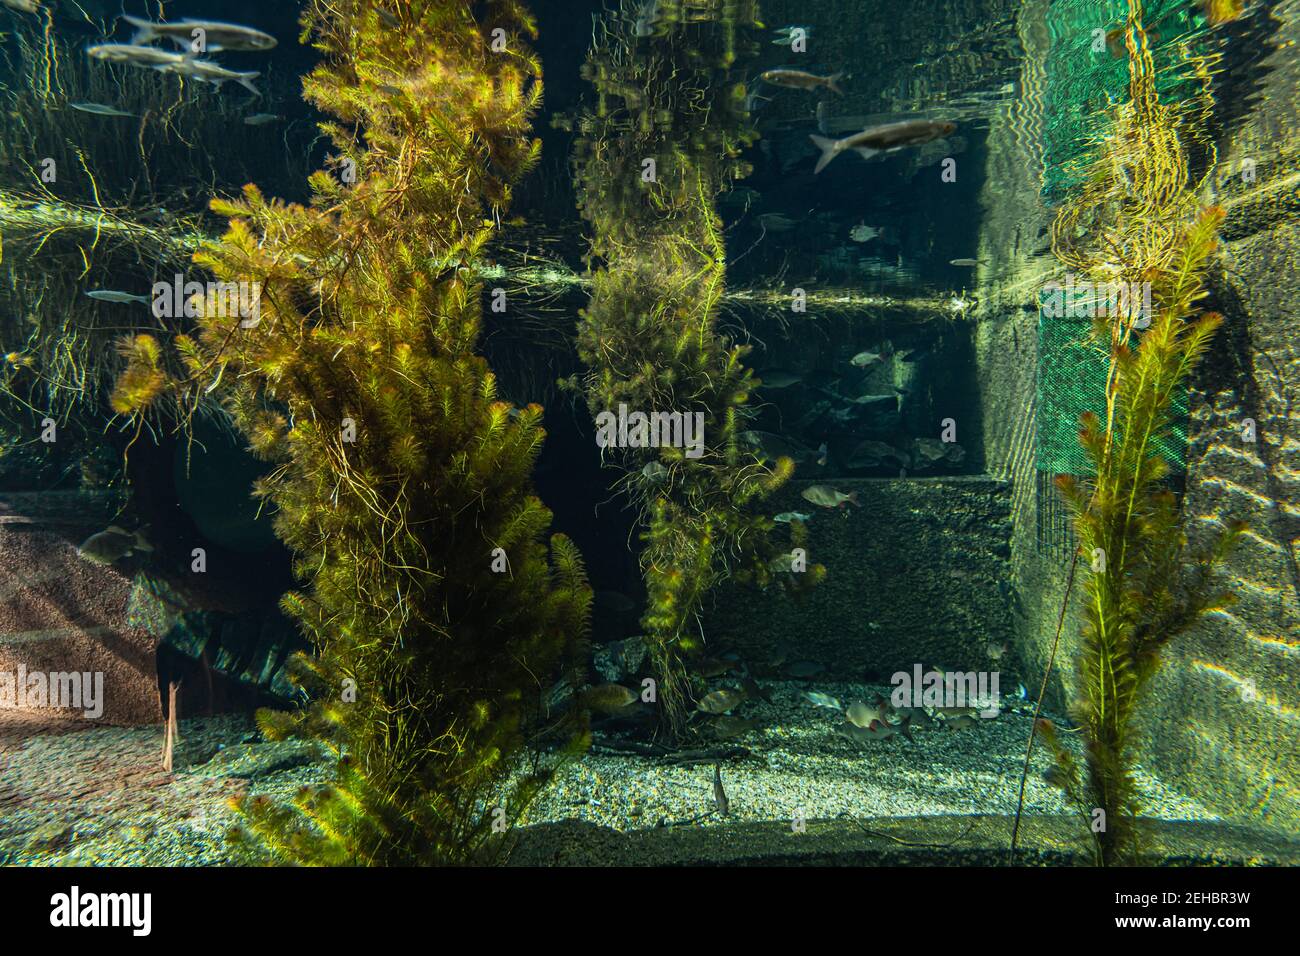 Large underwater bushes with few small fishes around Stock Photo